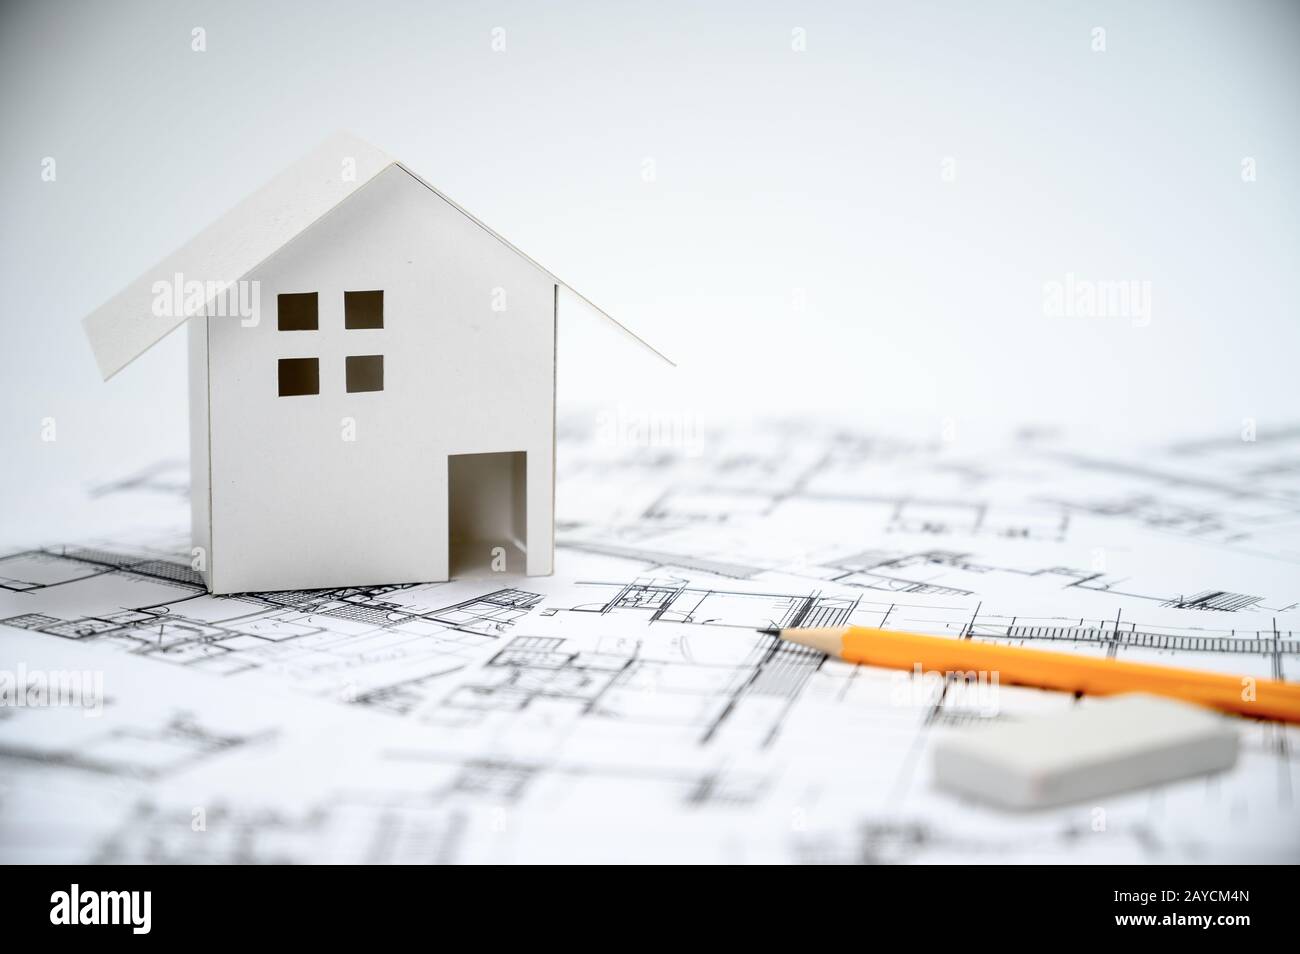 Construction industry concept with pencils and house models on architectural drawings. Stock Photo